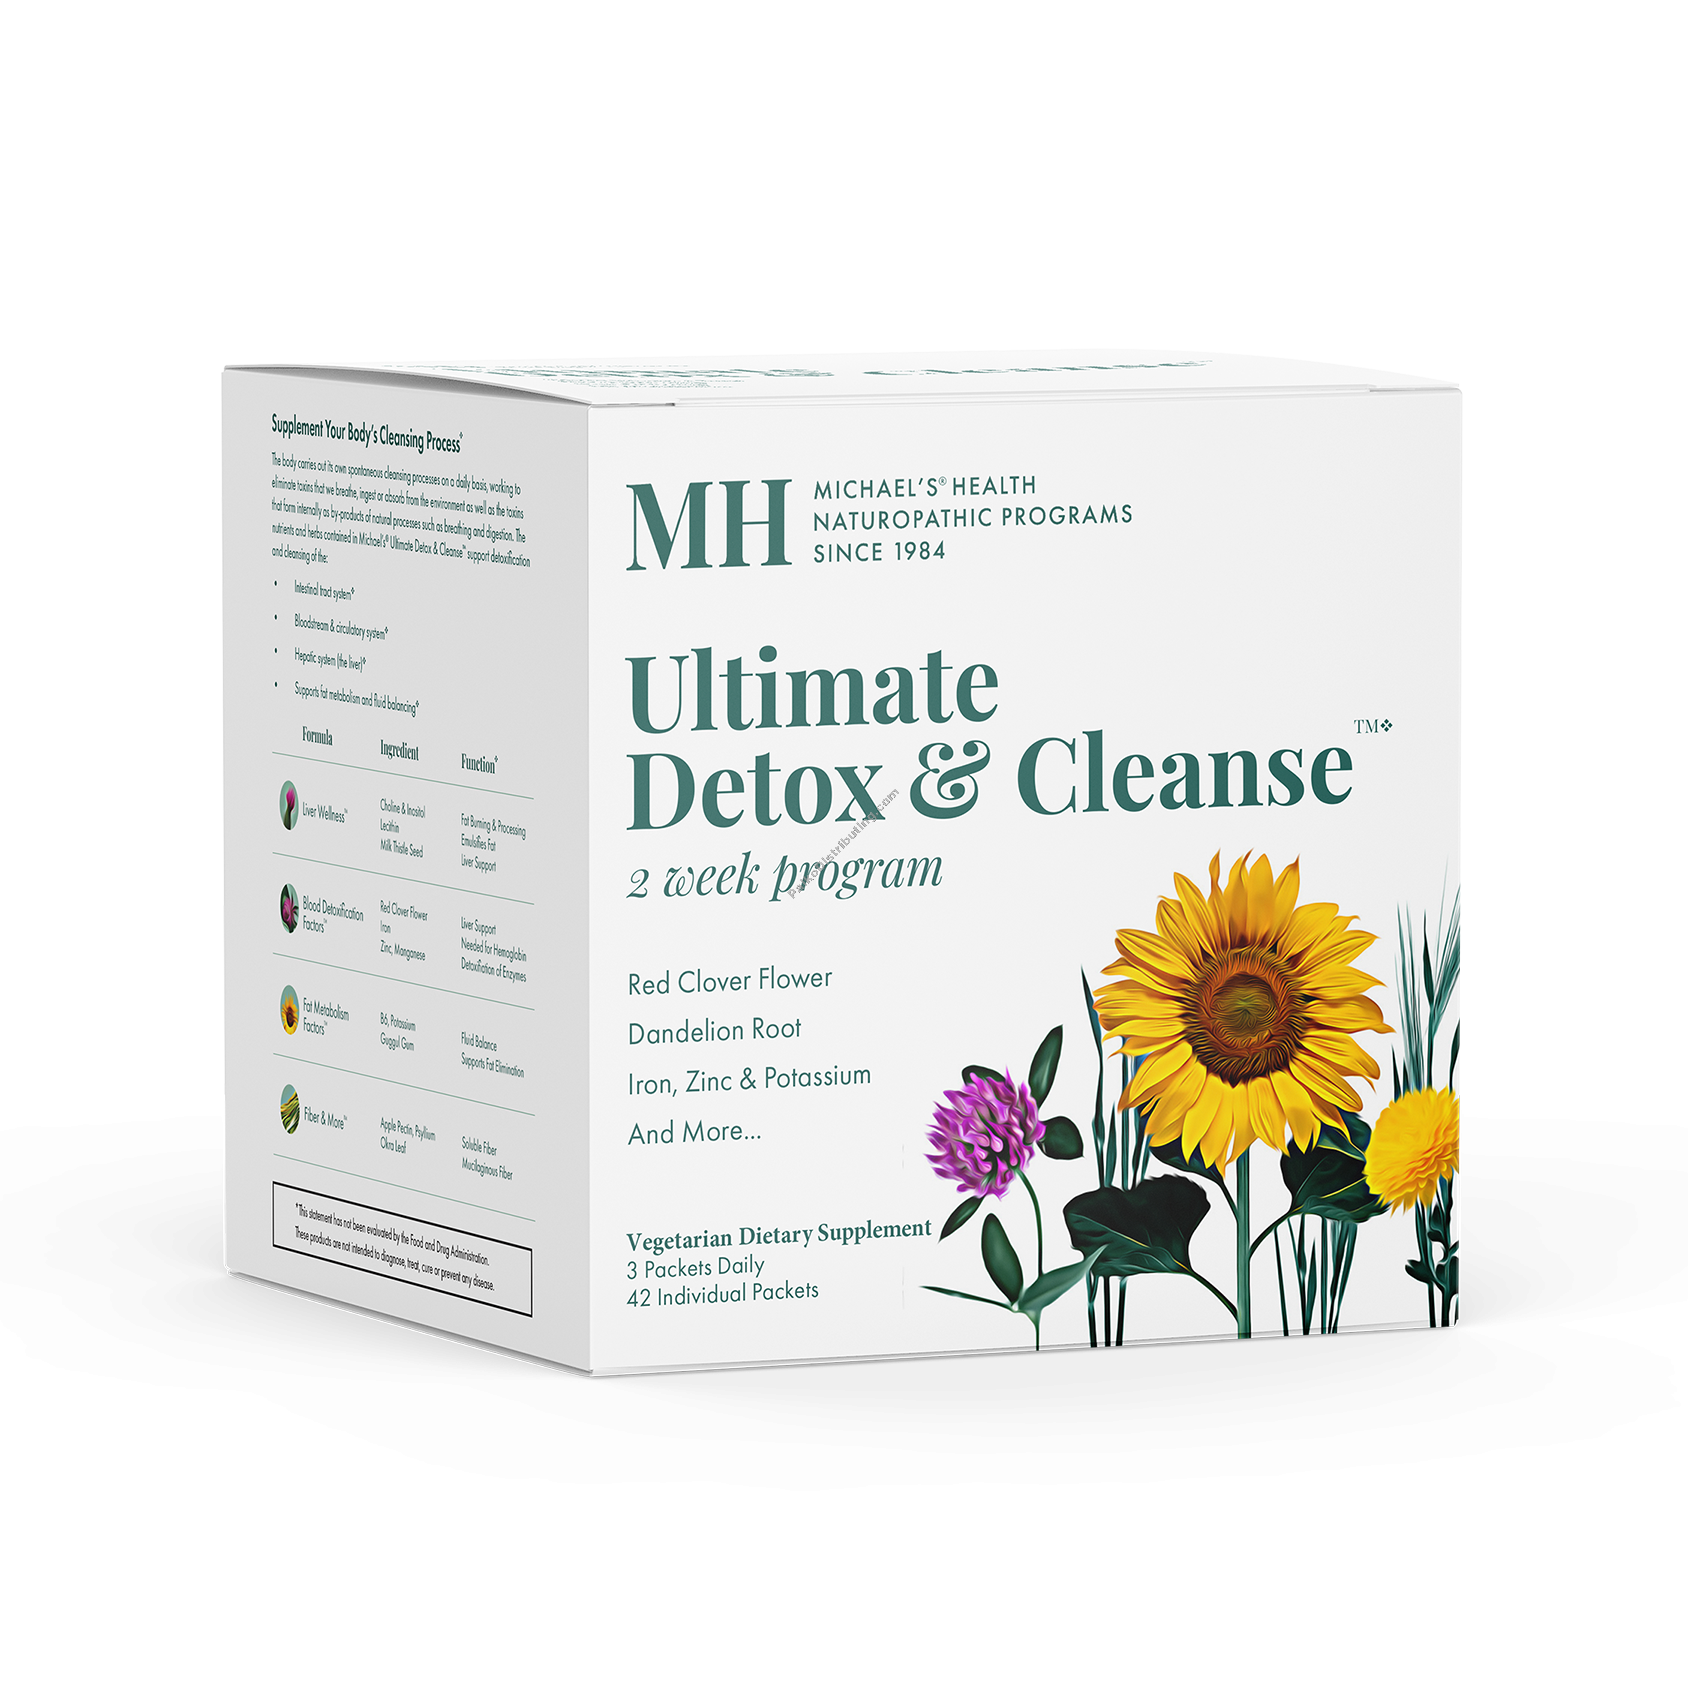 Product Image: Ultimate Detox & Cleanse